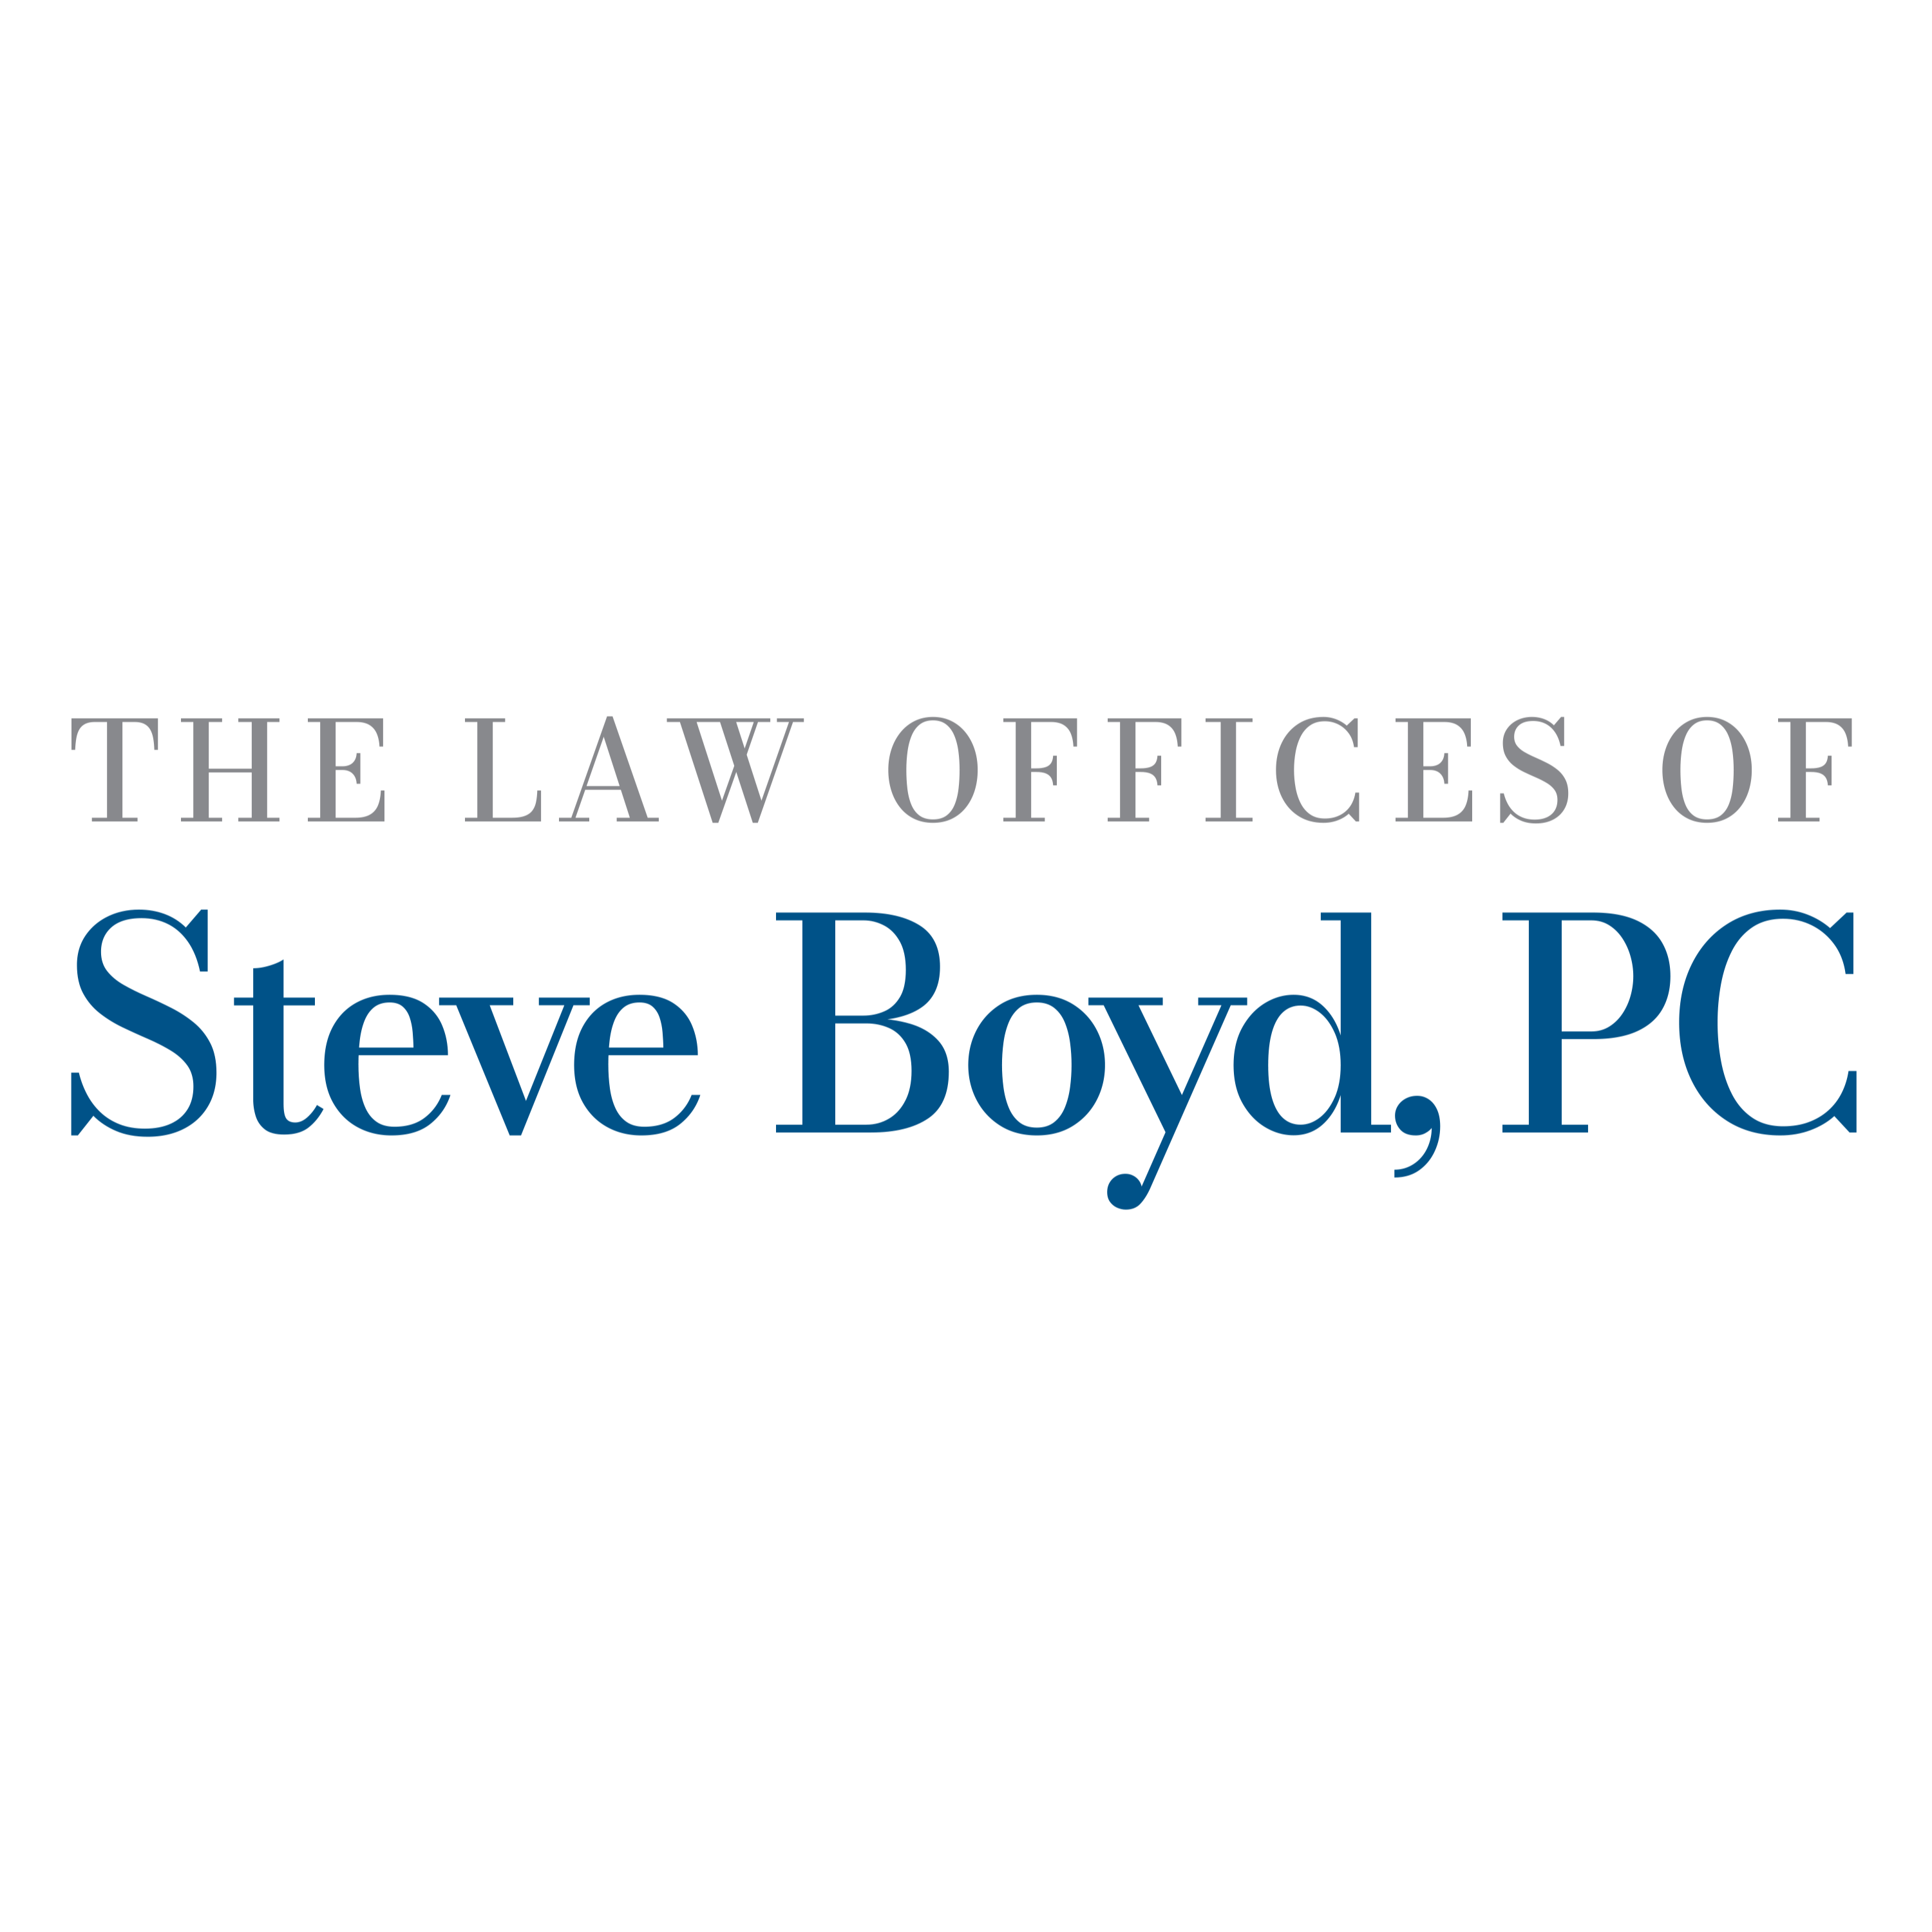 The Law Offices of Steve Boyd, PC - Buffalo, NY 14214 - (716)600-0000 | ShowMeLocal.com